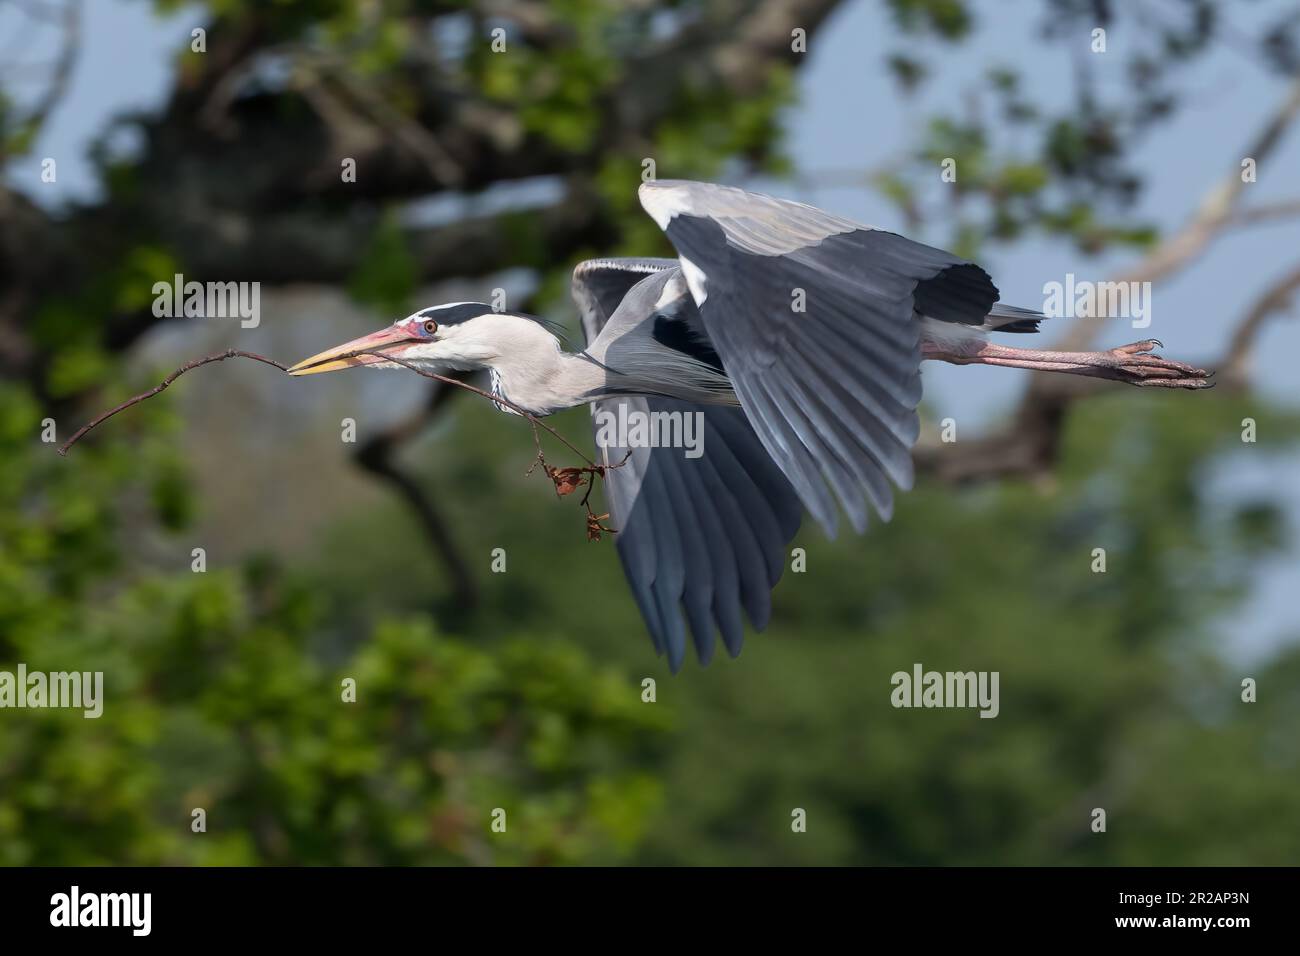 Grey Heron flying after collecting nesting material in beak Stock Photo